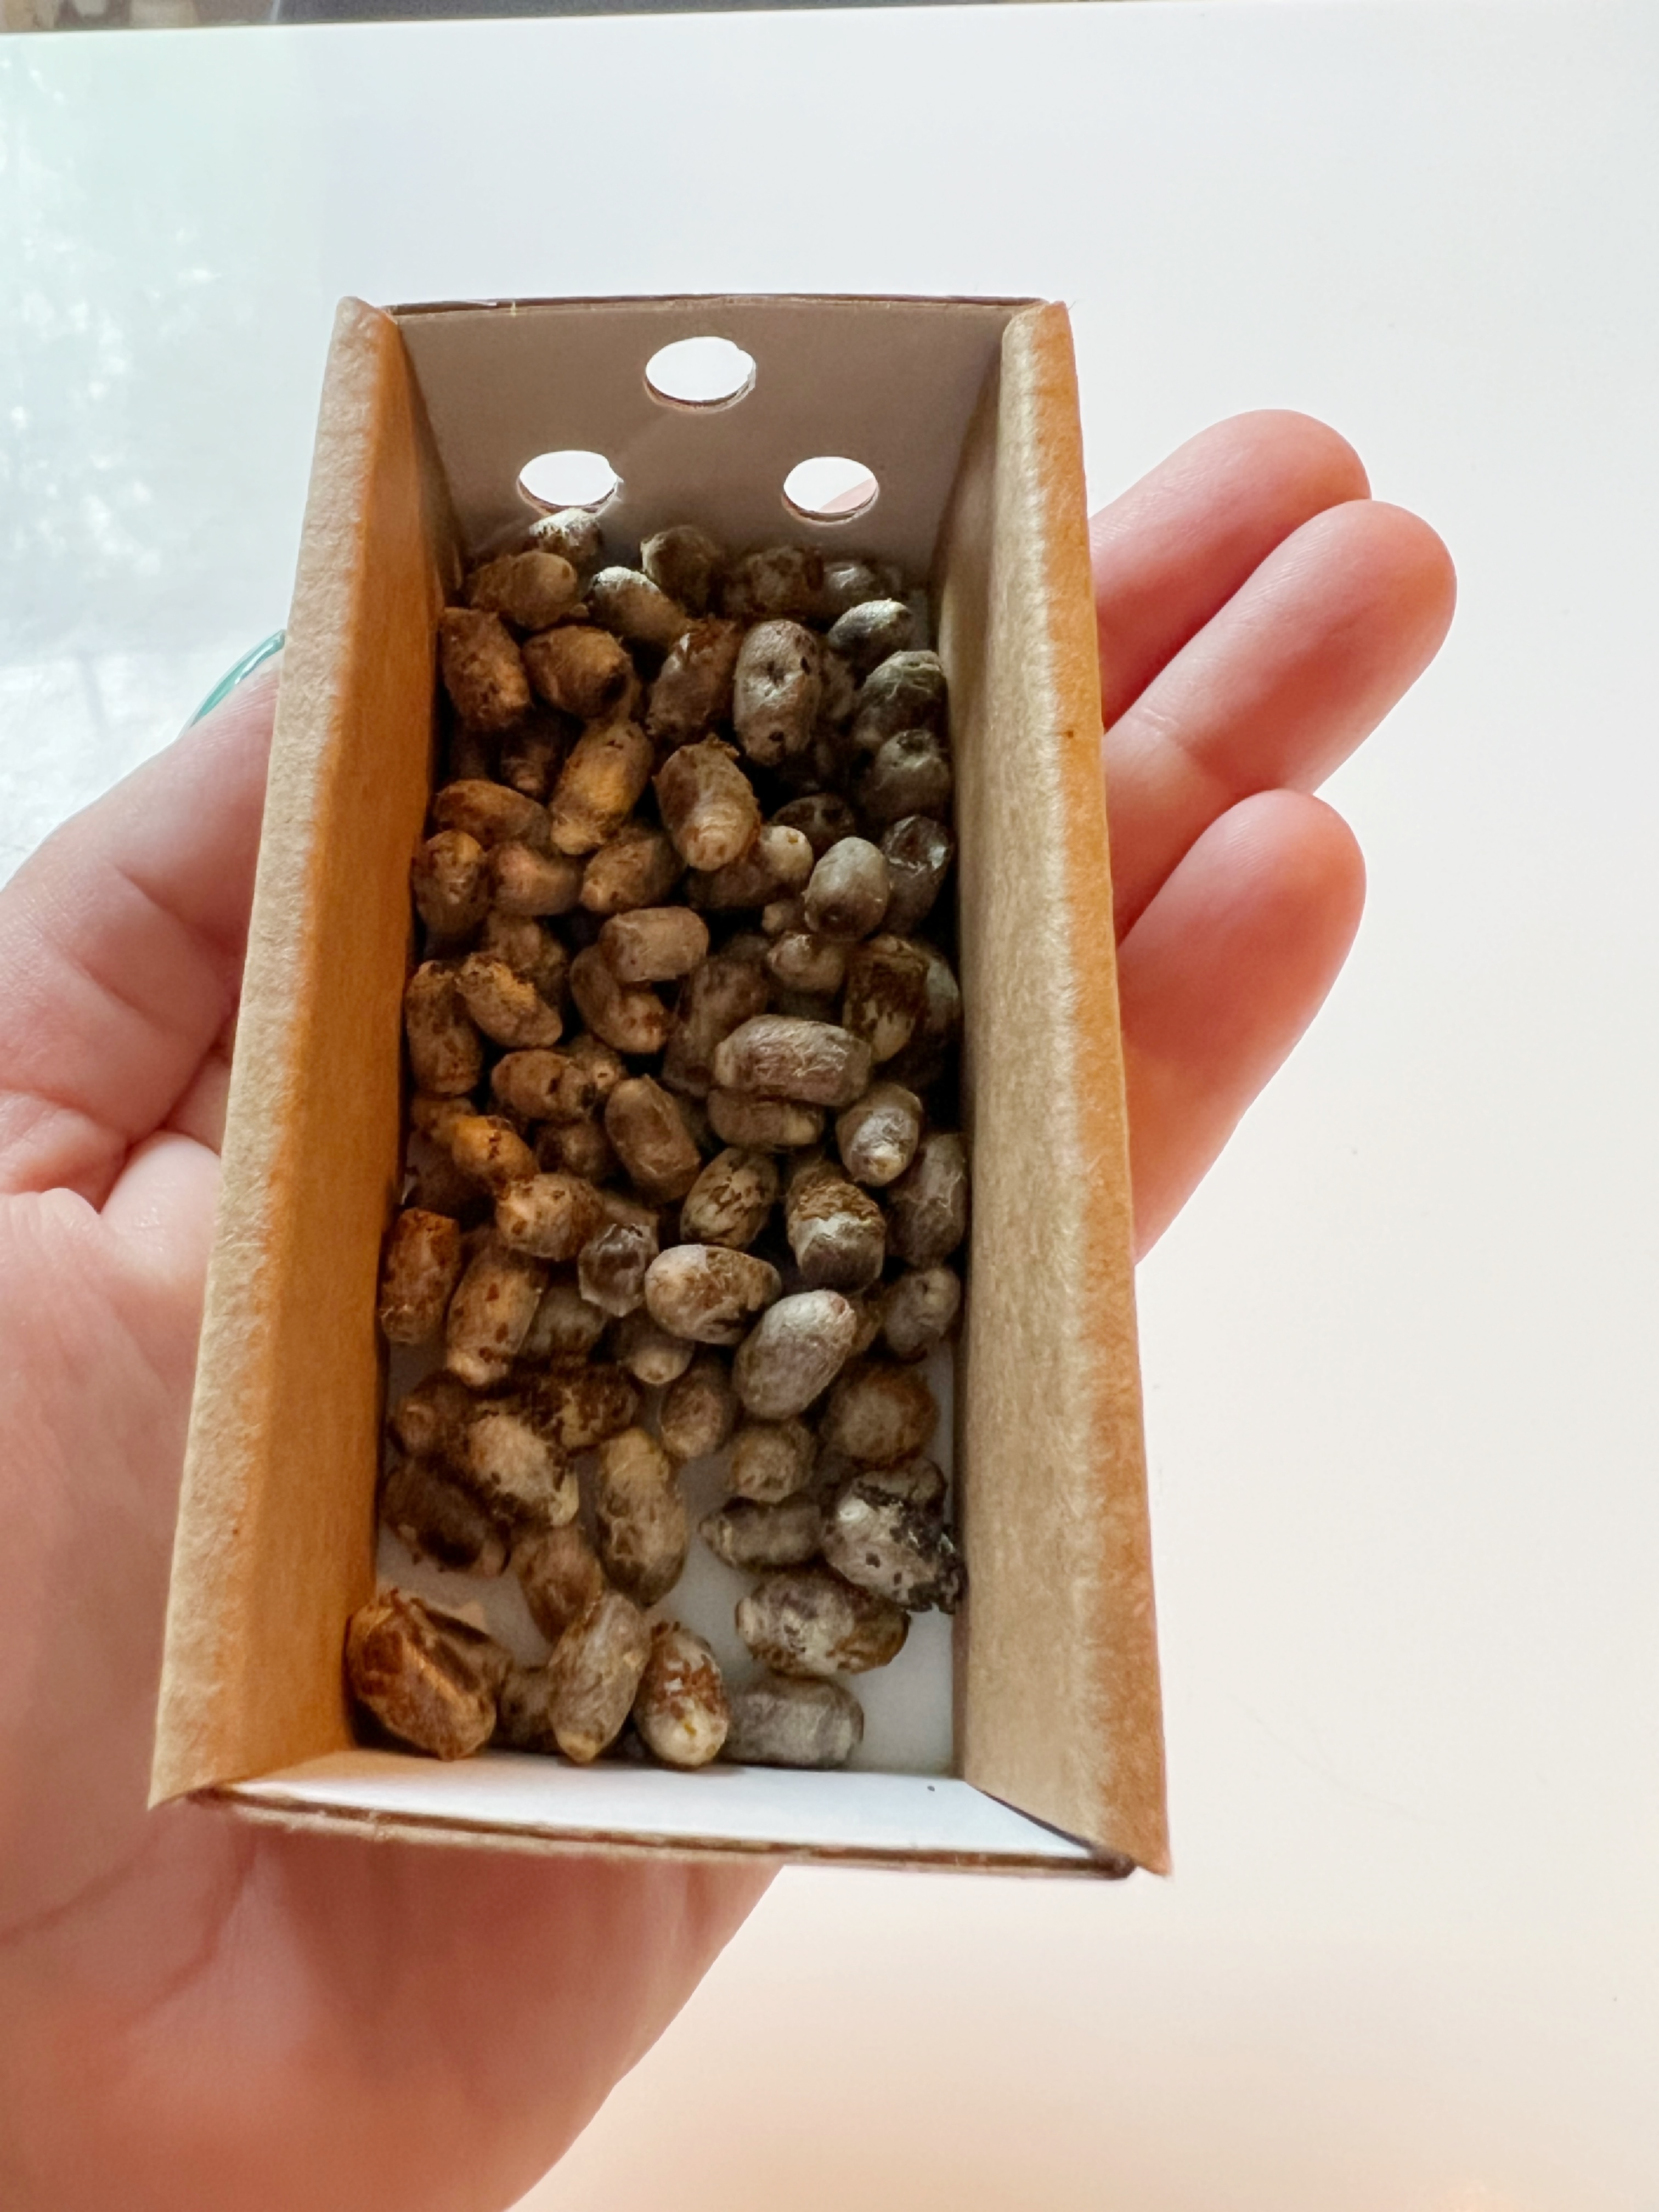 Many small bee larva in a cardboard container in the palm of a hand